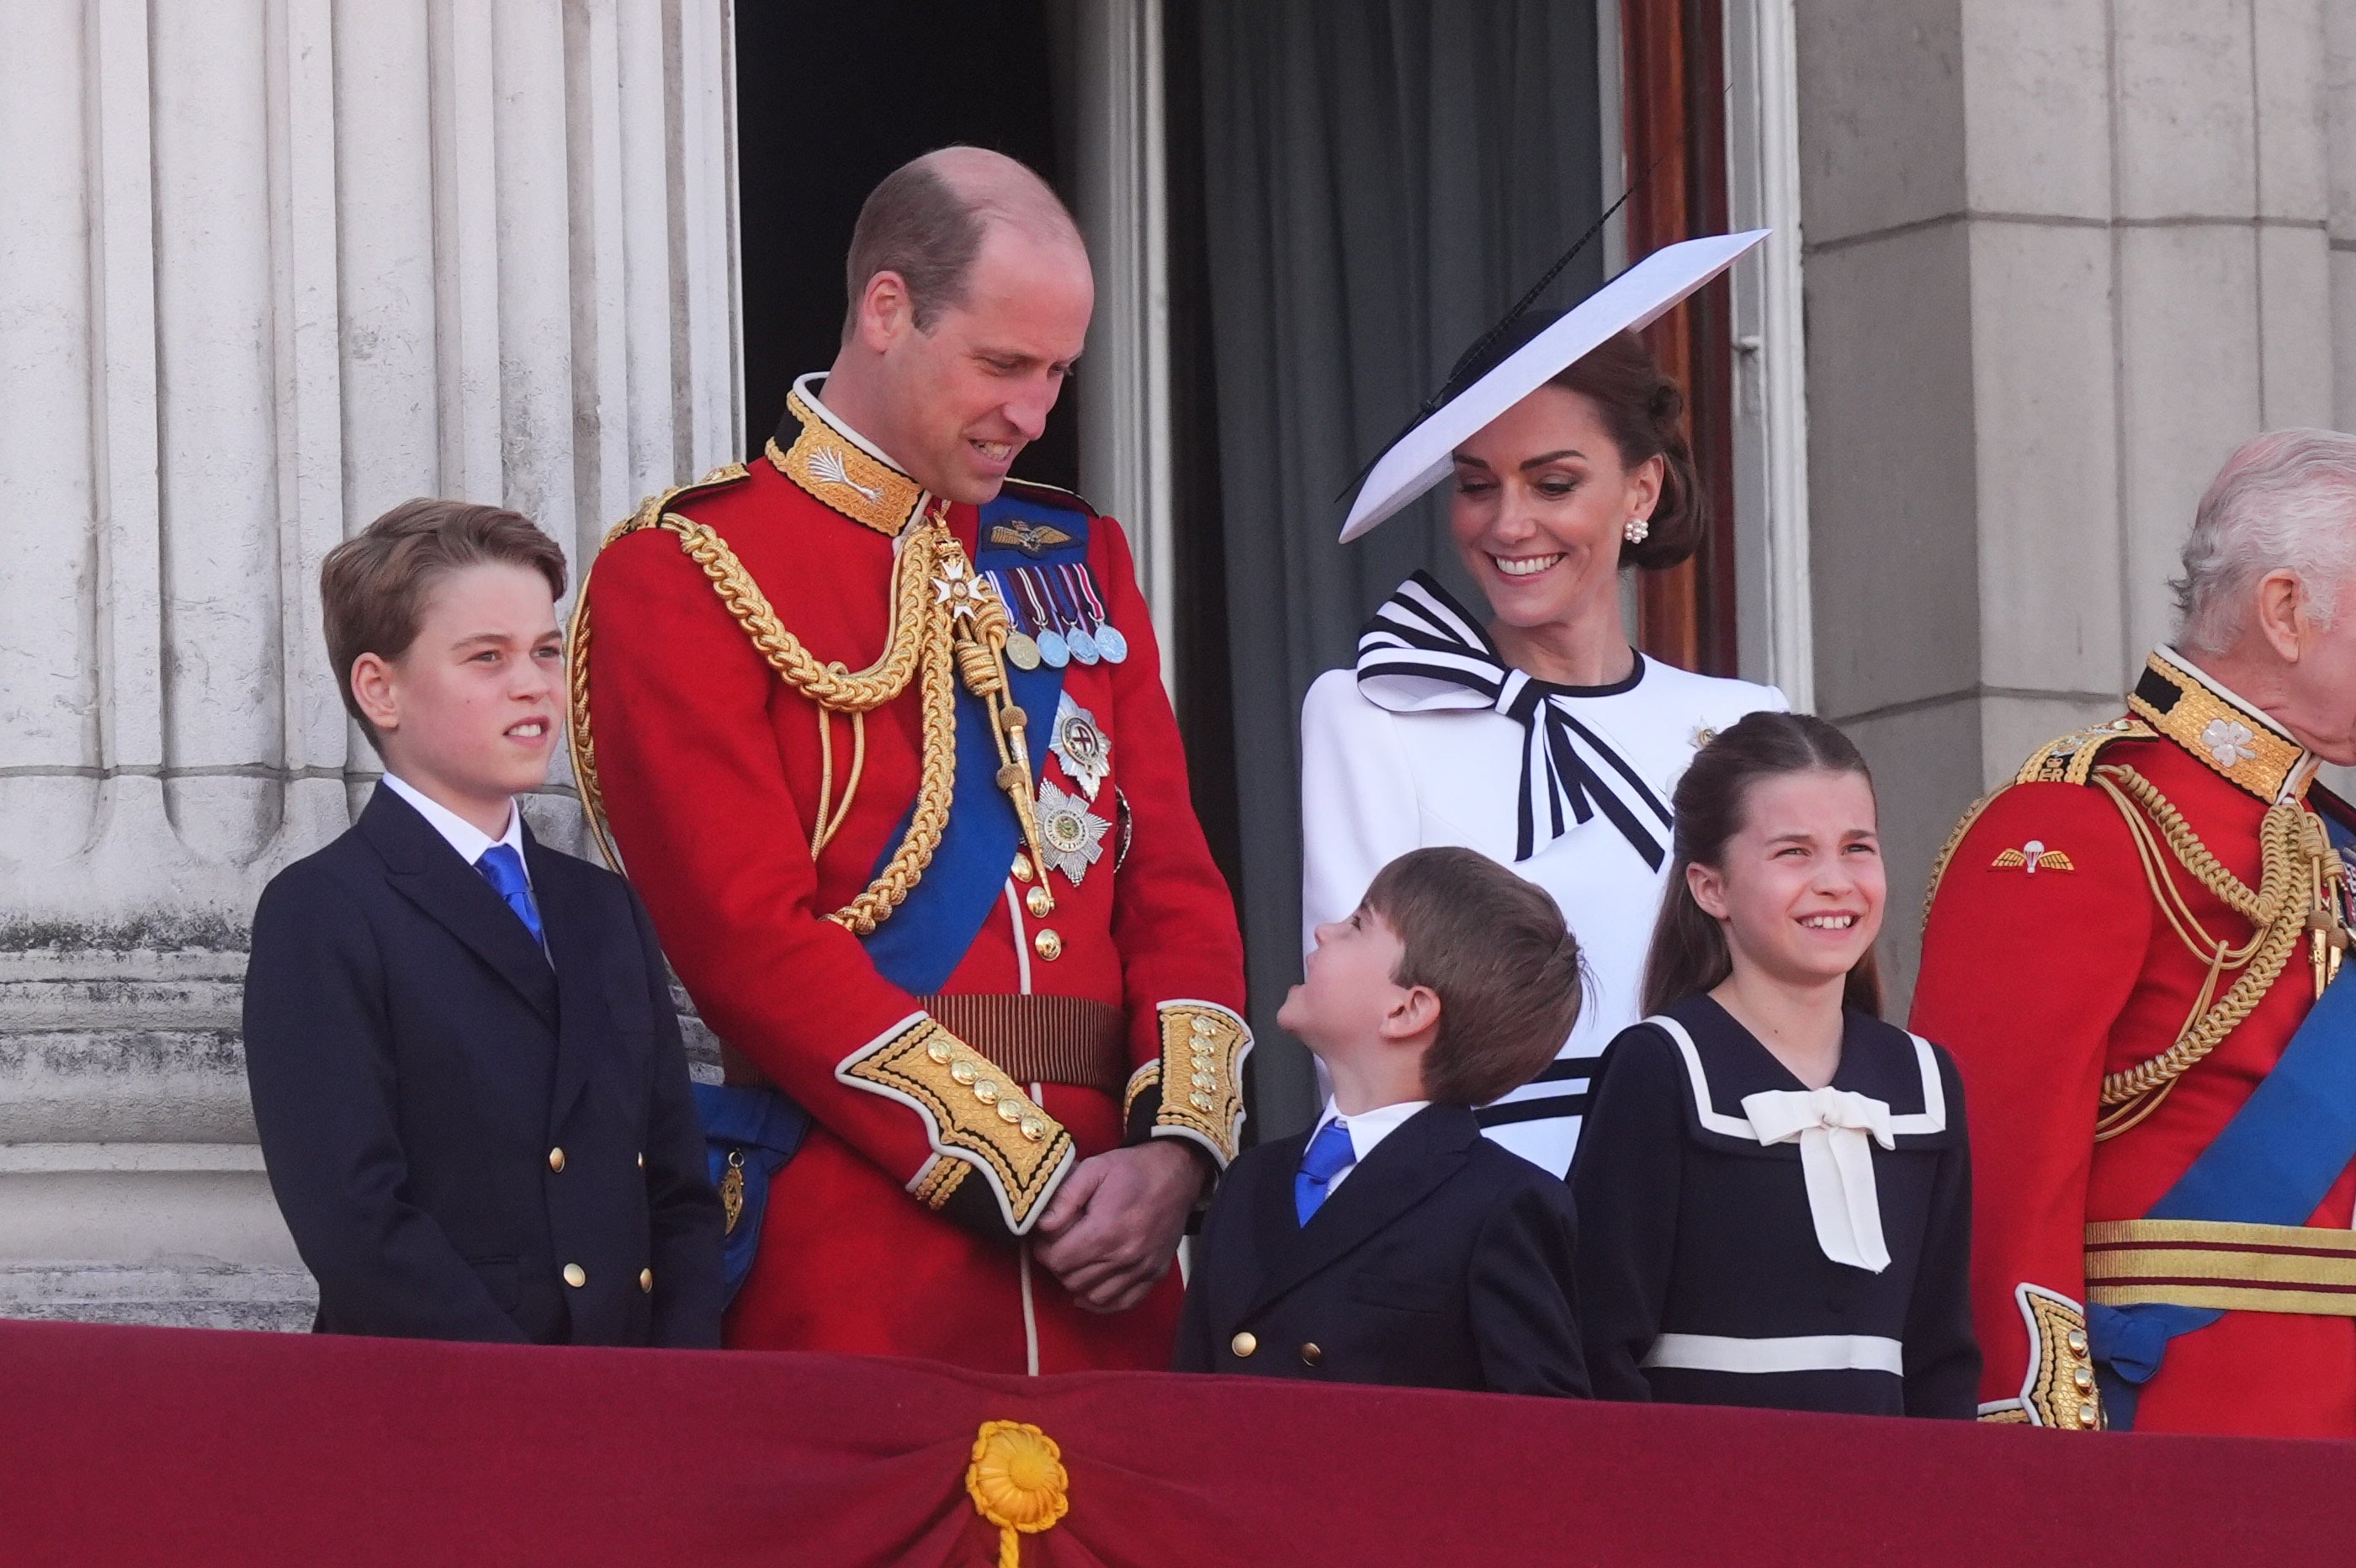 Prince Louis looks up at his father as his mother the Princess of Wales smiles on the balcony of Buckingham Palace